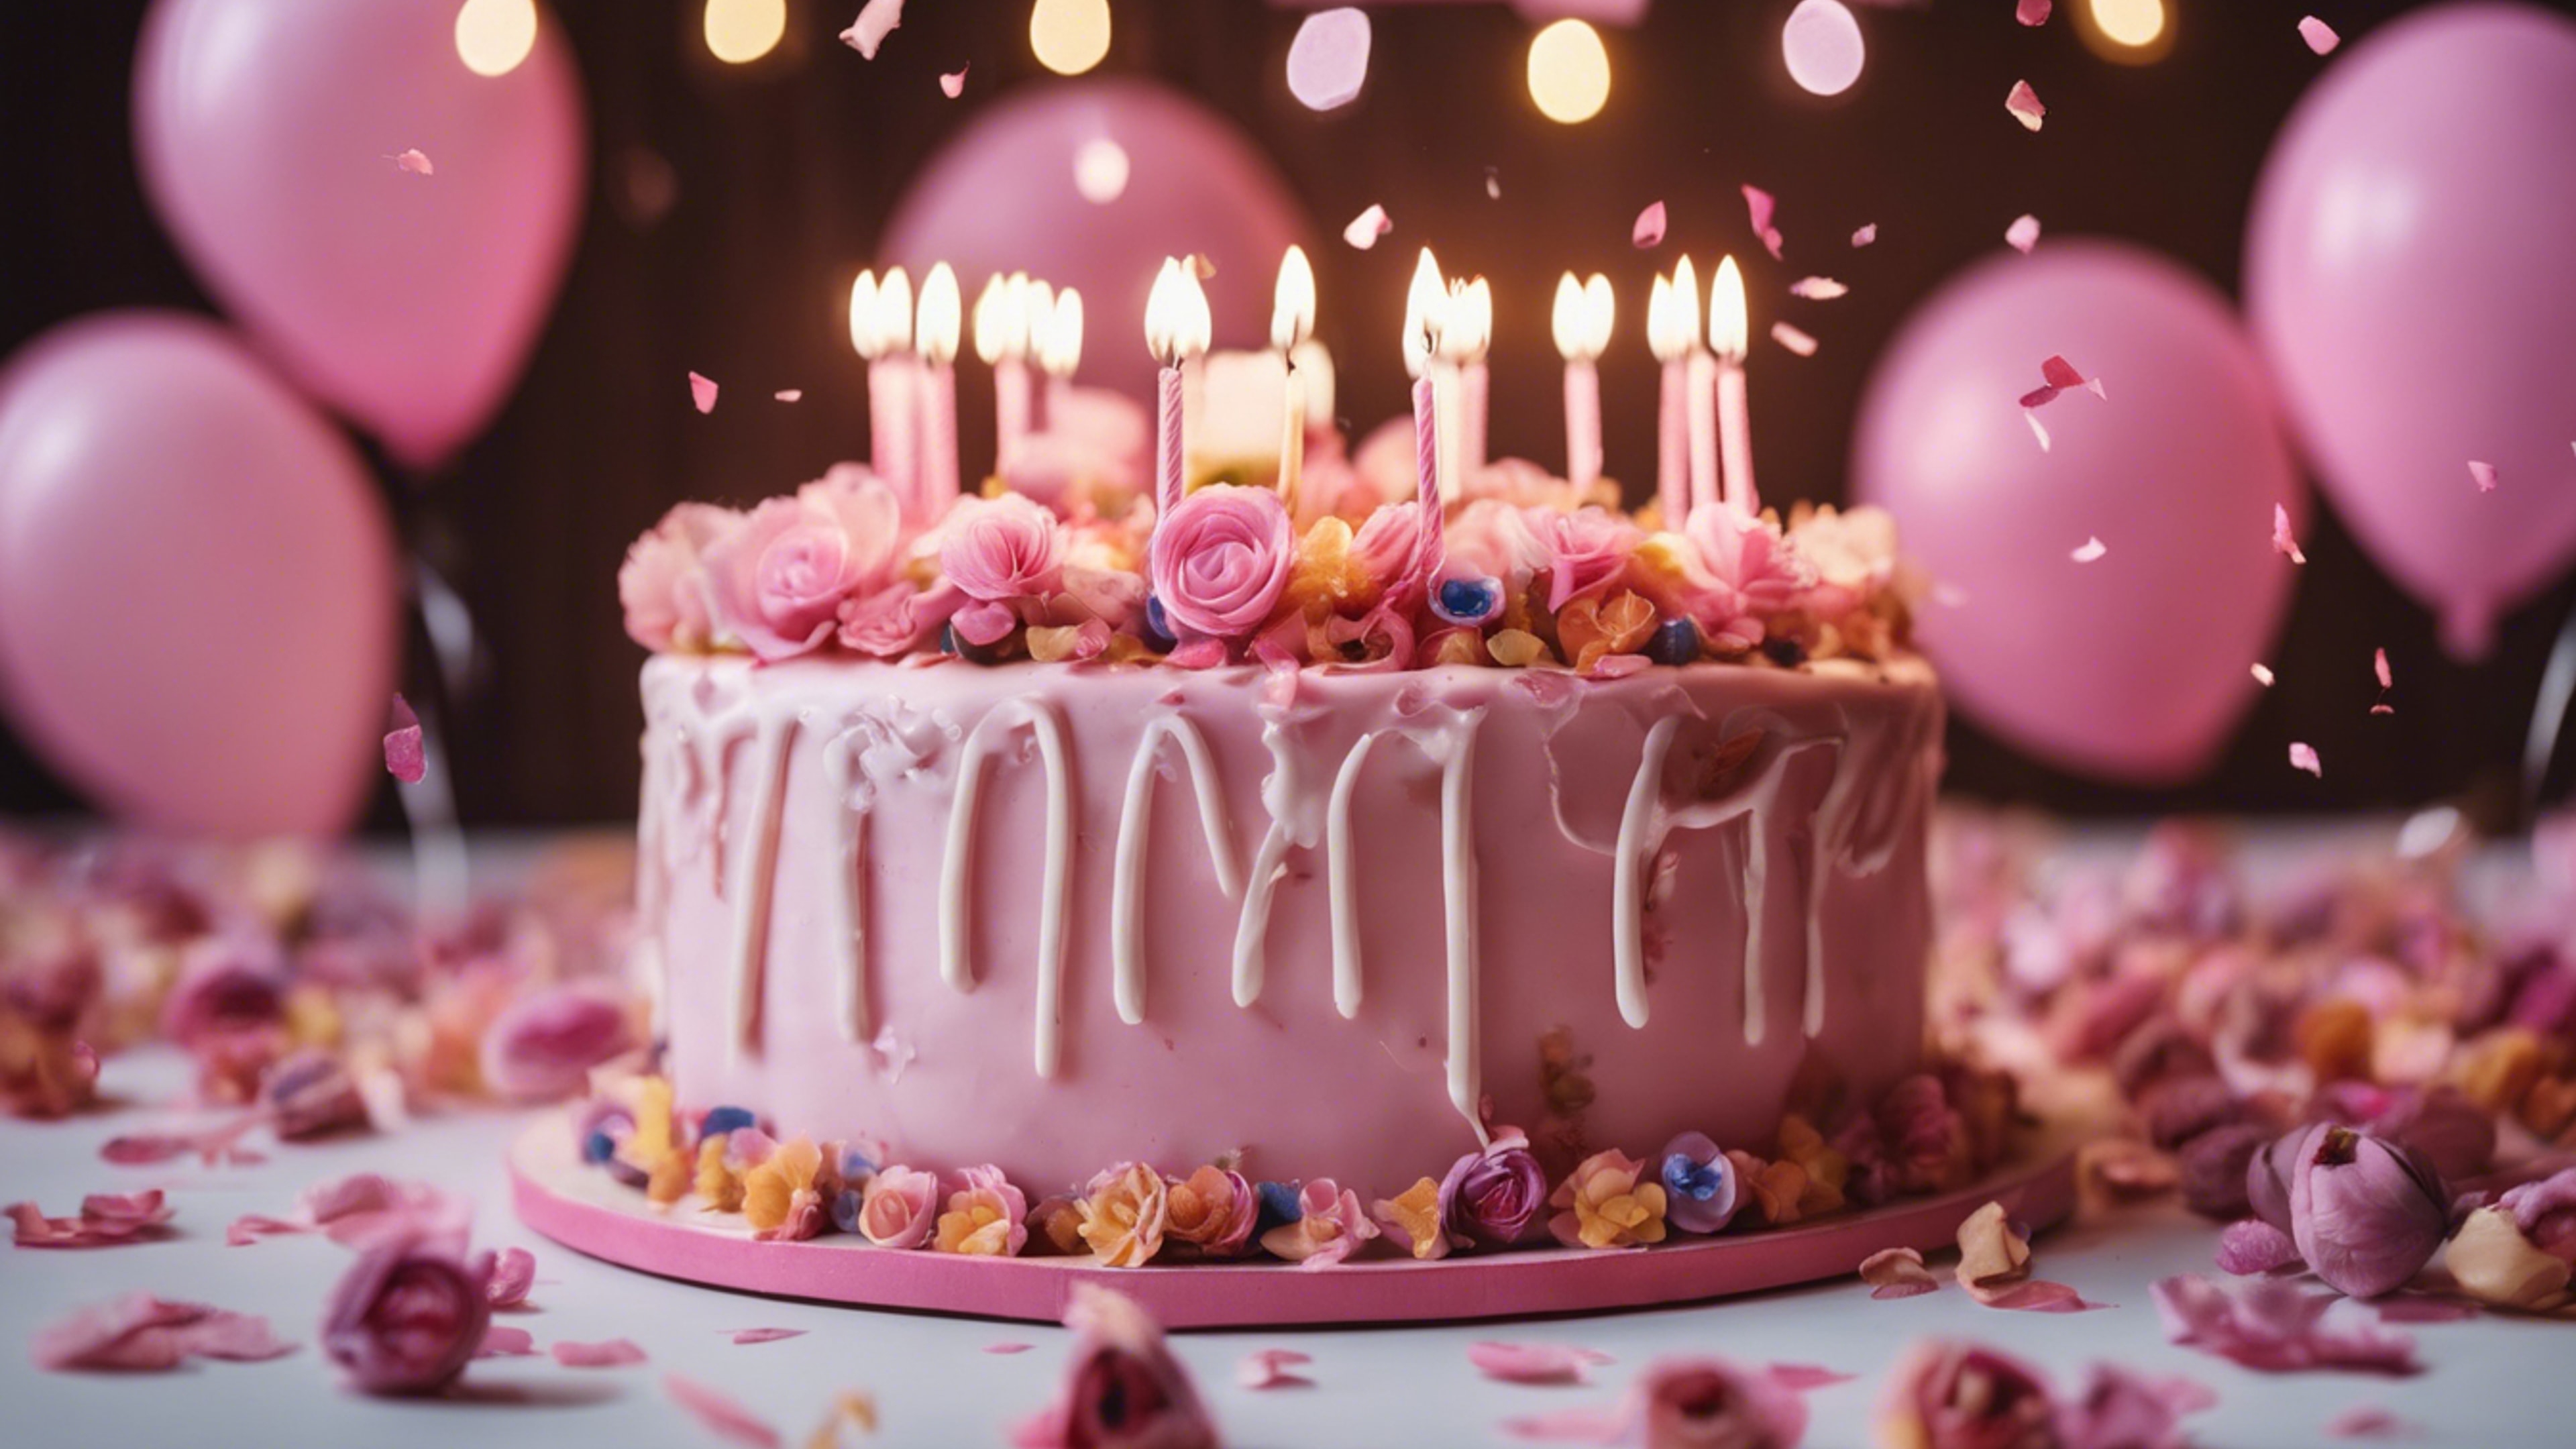 A girly birthday party with pink balloons, confetti, and a big cake decorated with edible flowers. 벽지[43e1da28e36740768483]